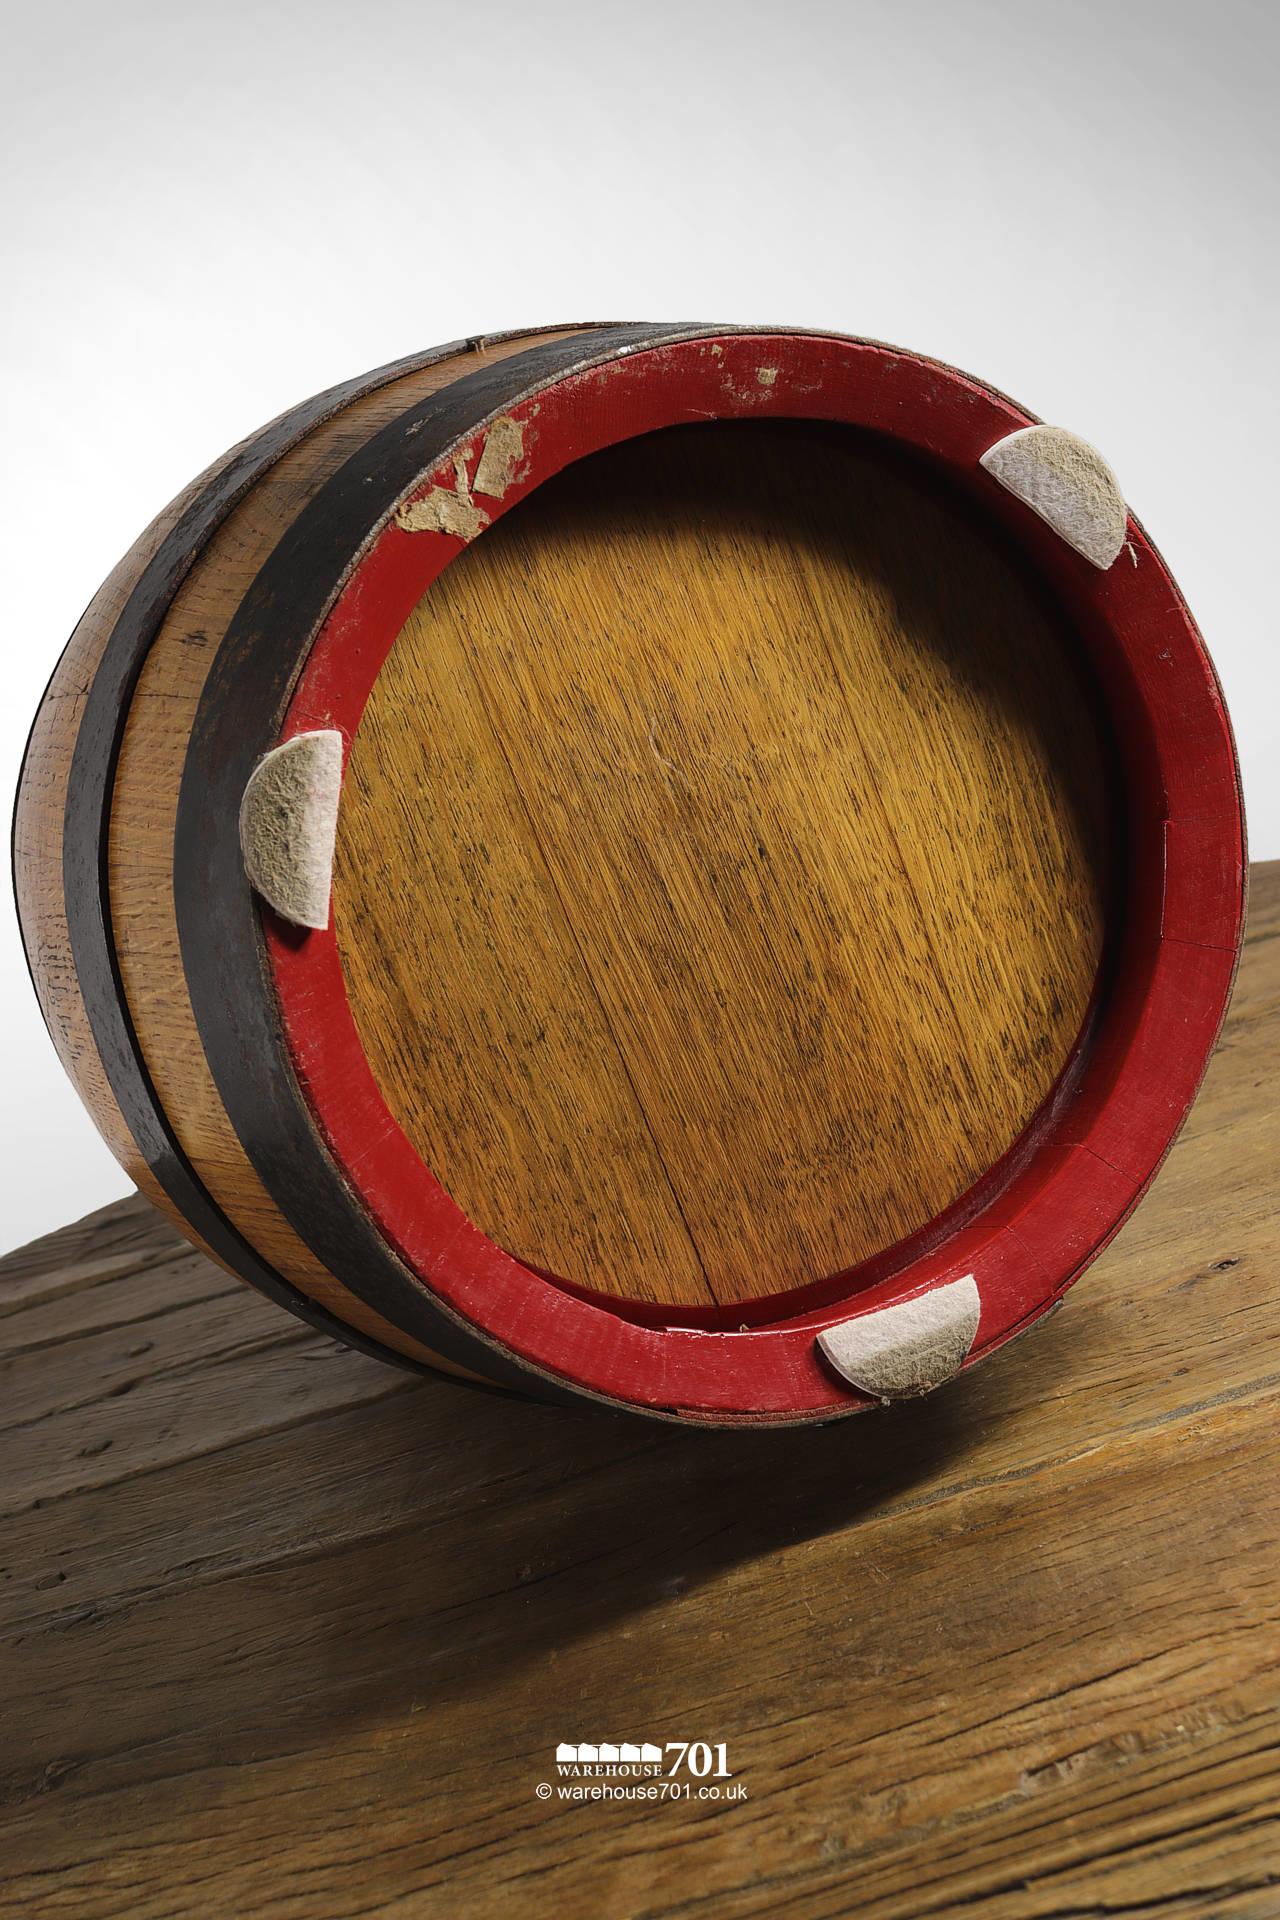 Small Old Hand Coopered Oak Barrel 'Pop Up Pirate' Style Decorative and Functional #4